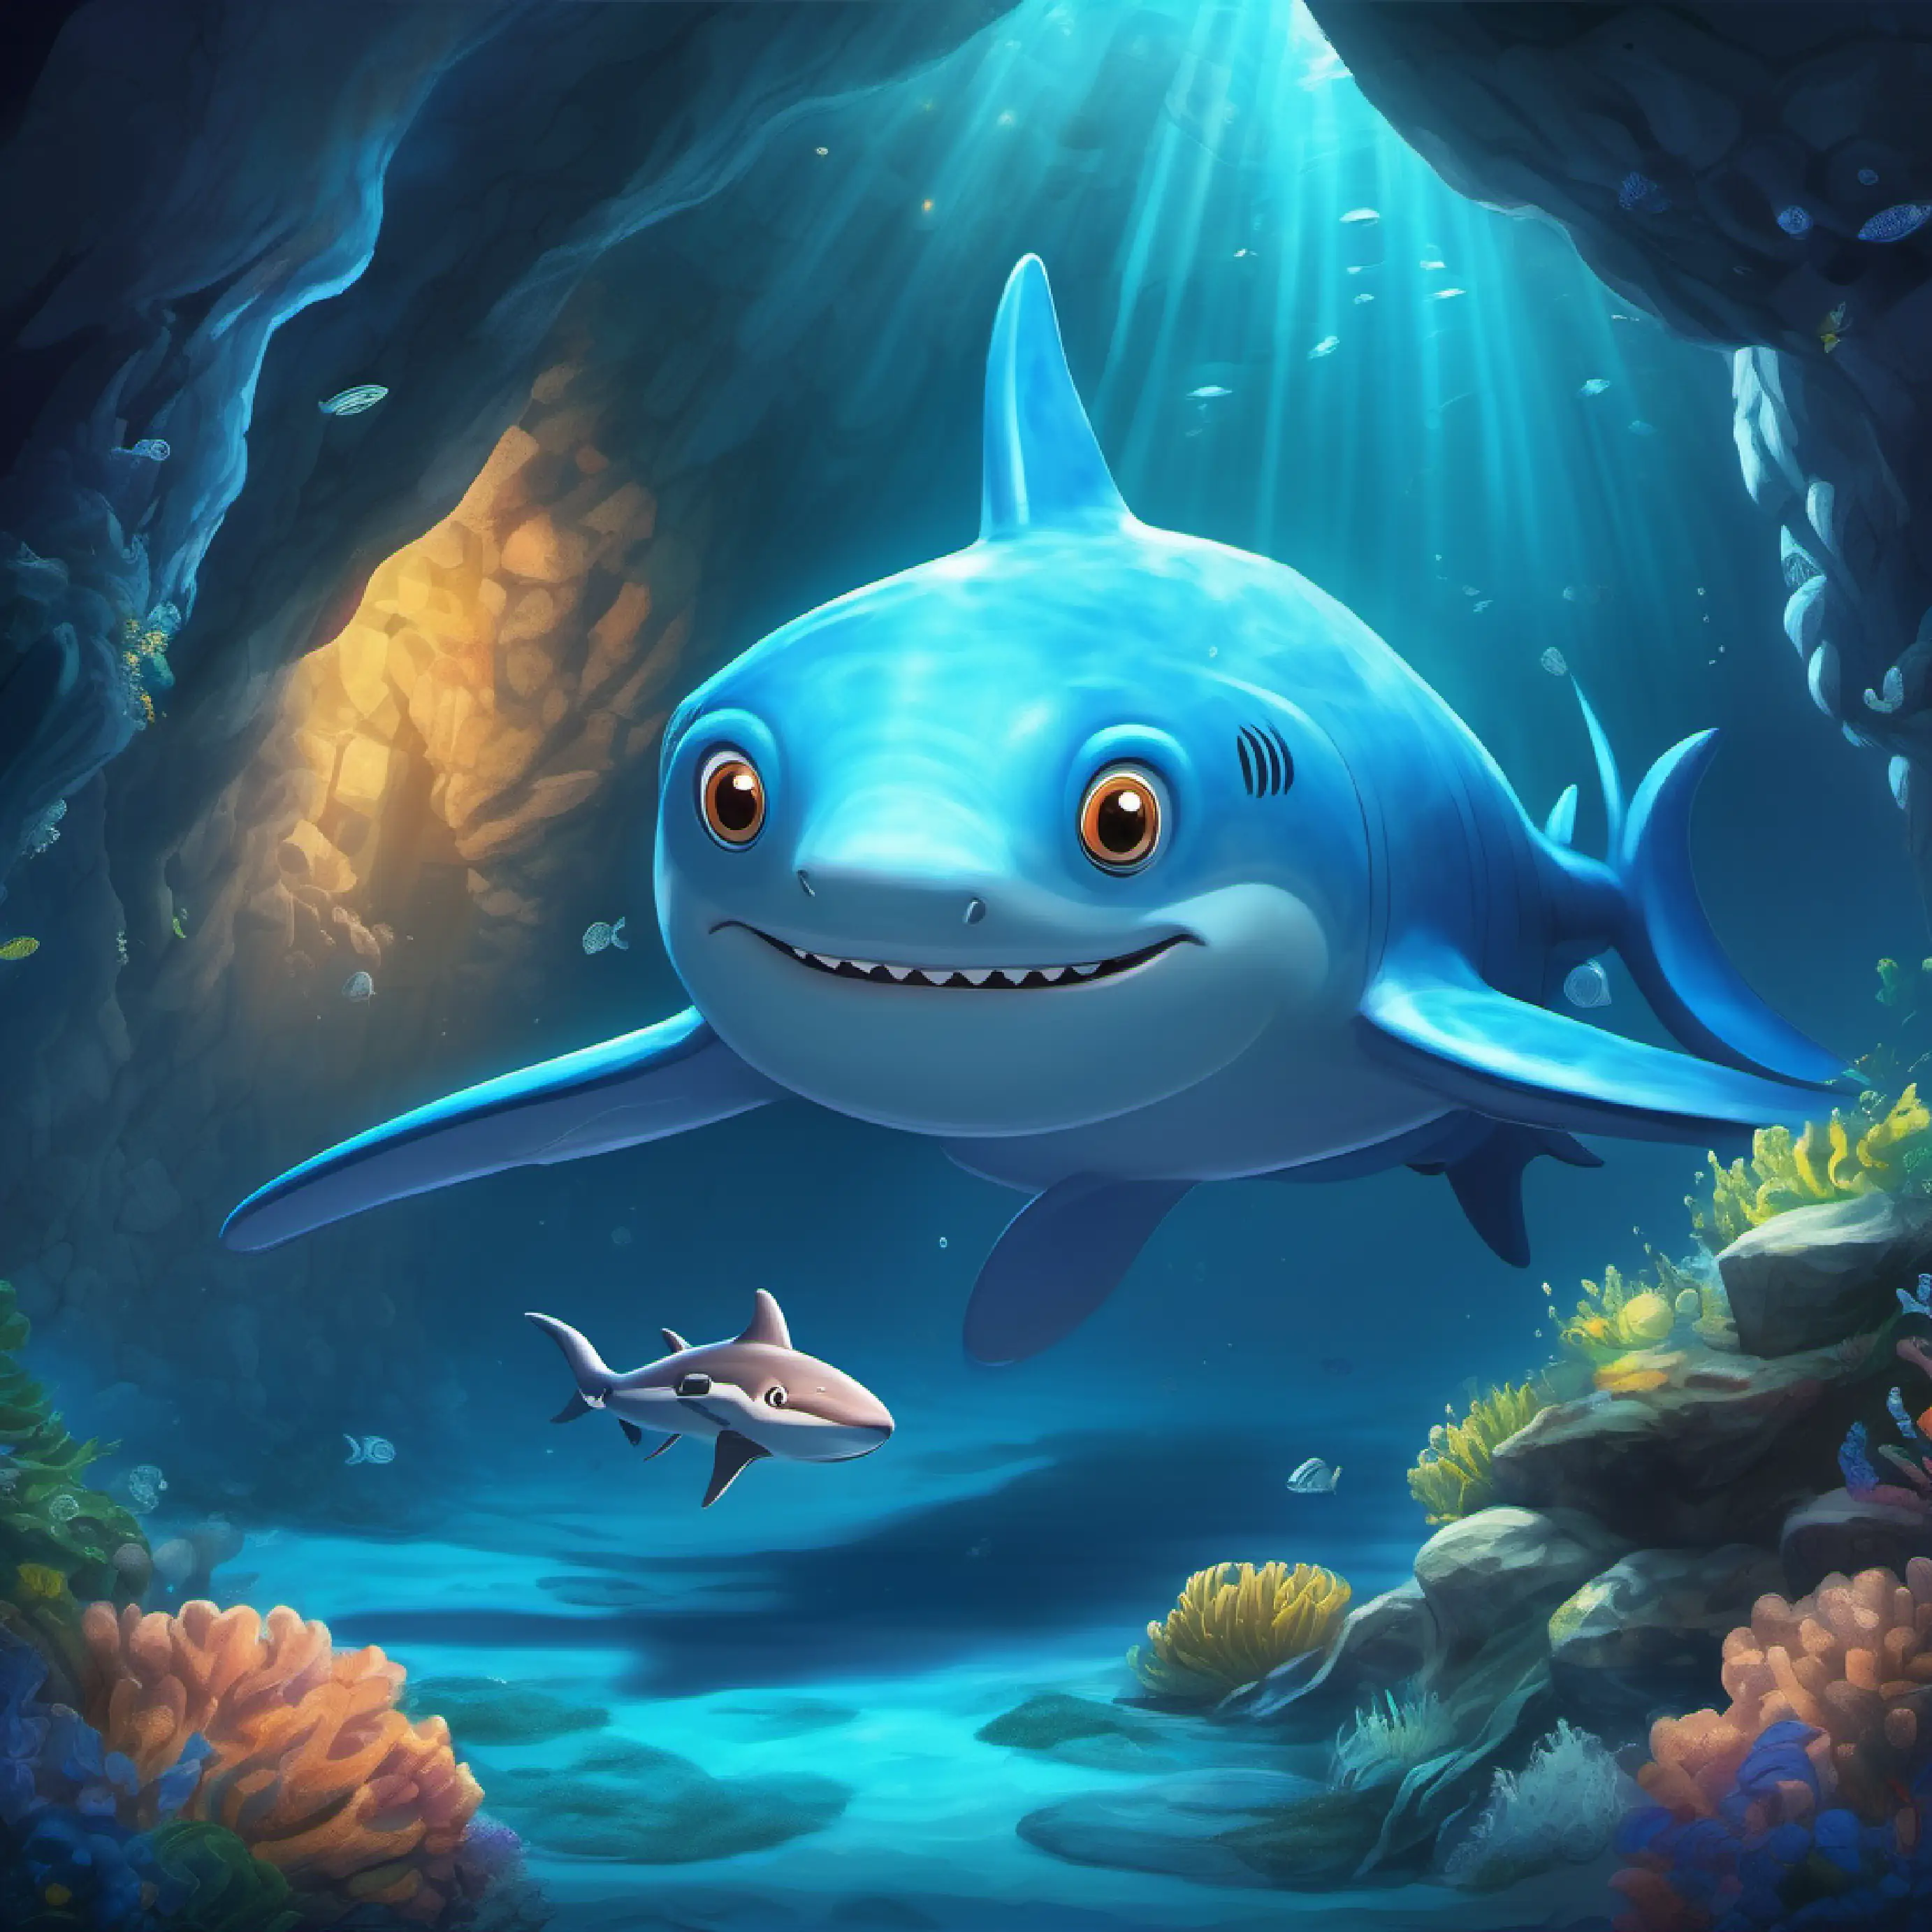 Deep-sea cave appearance, introduction of giant octopus, Big, friendly shark with a shiny smile Blue-gray skin, bright twinkling eyes's brave act.